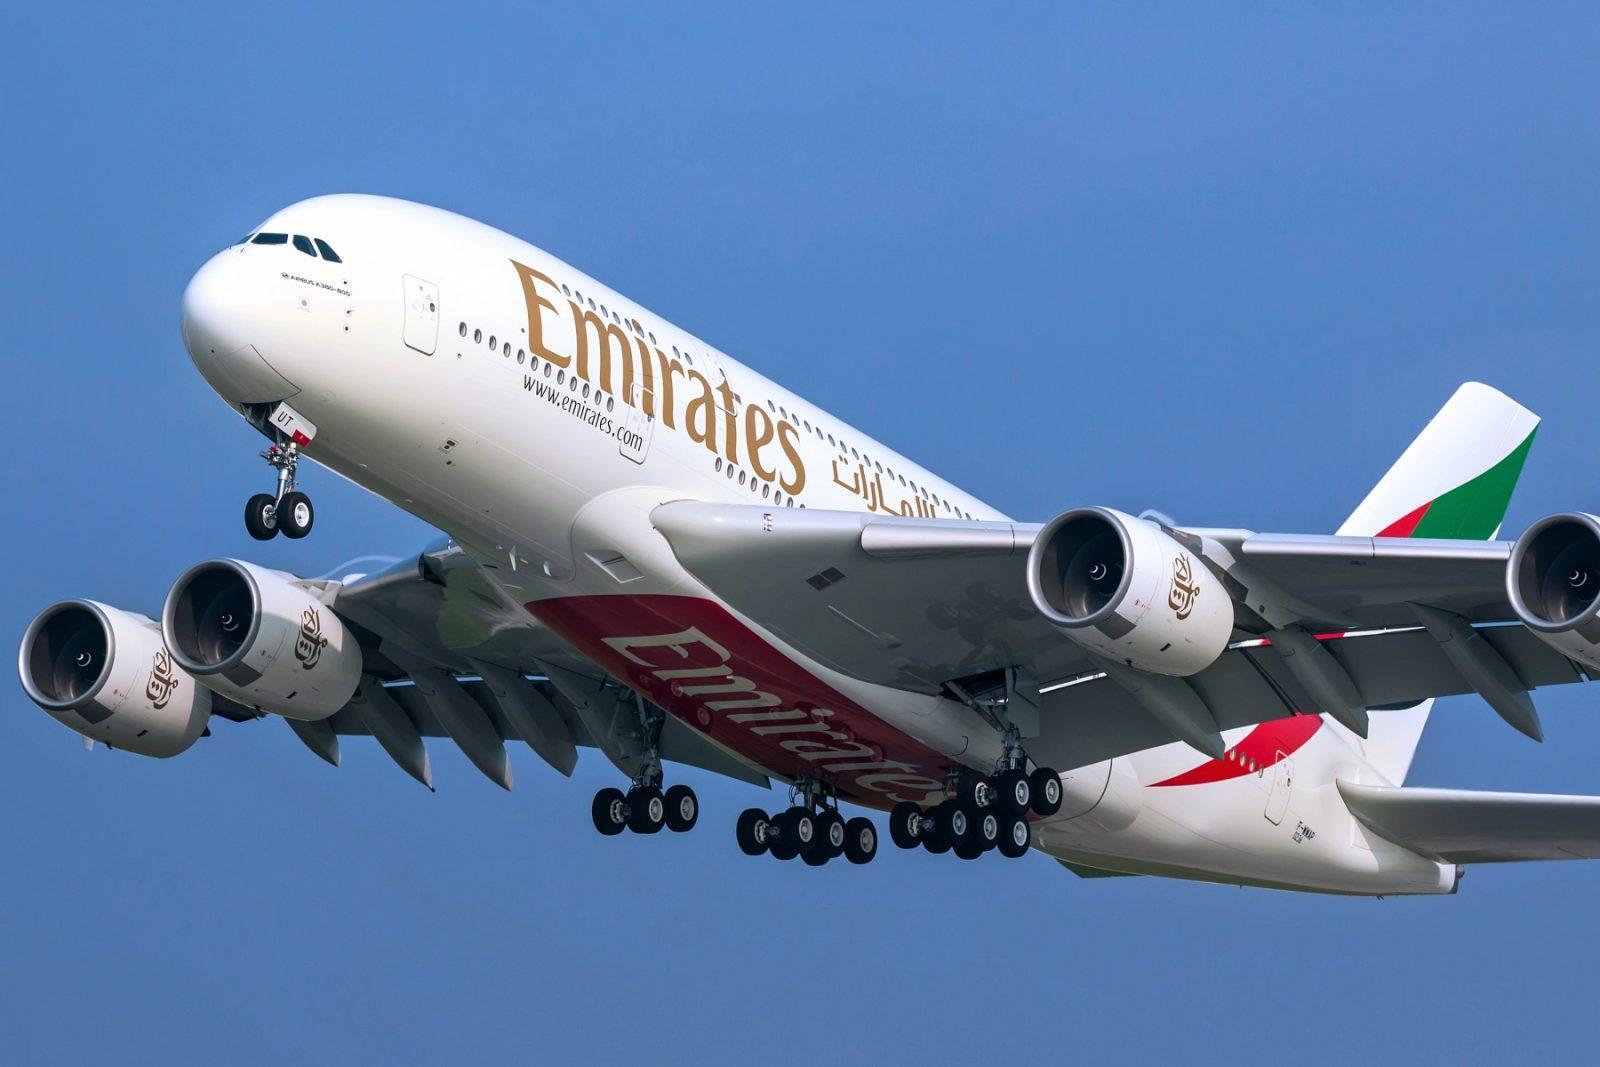 Emirates Expands A380 Network, Brings Back Resumption of Services to Birmingham, Glasgow and Nice